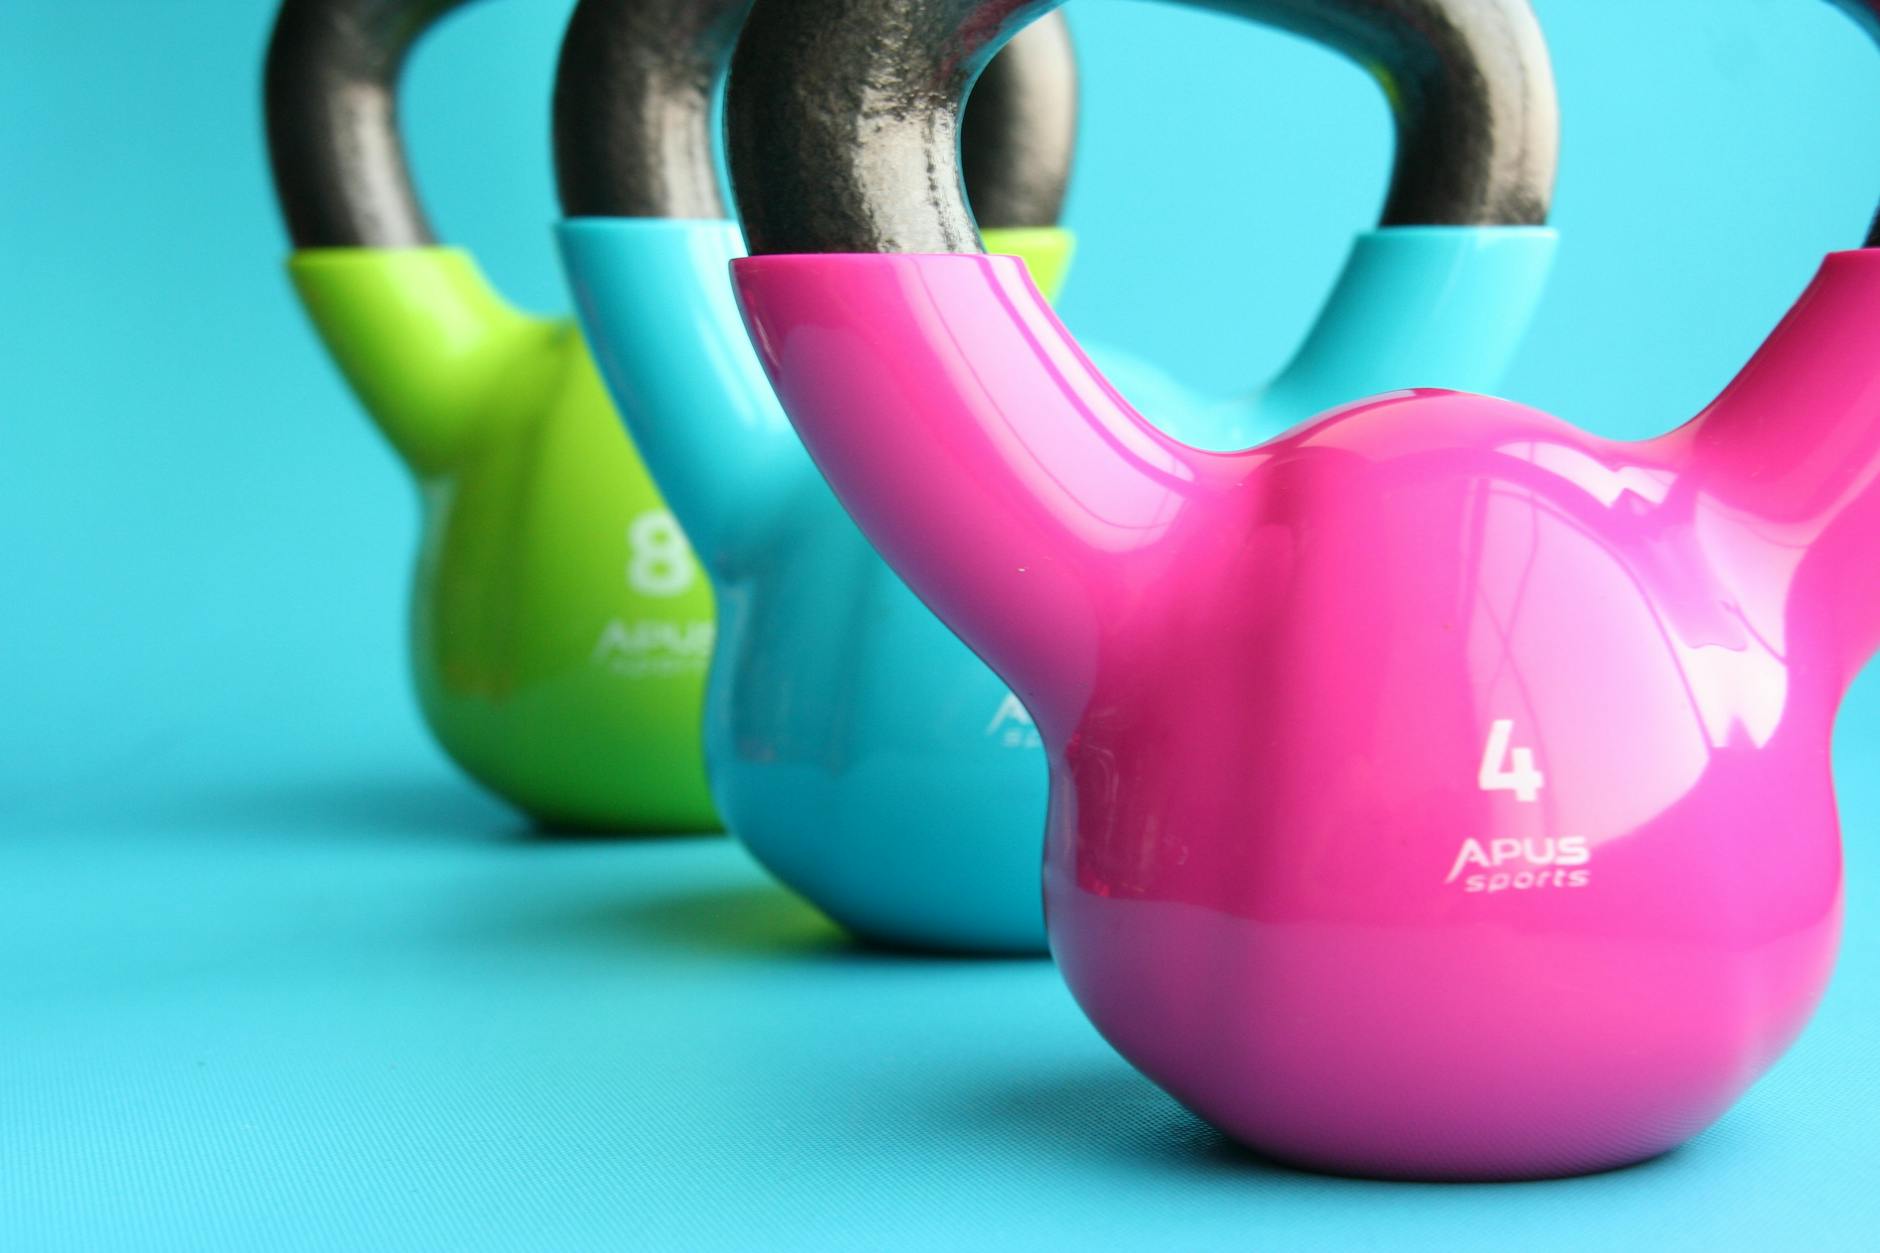 green blue and pink kettle bells on blue surface